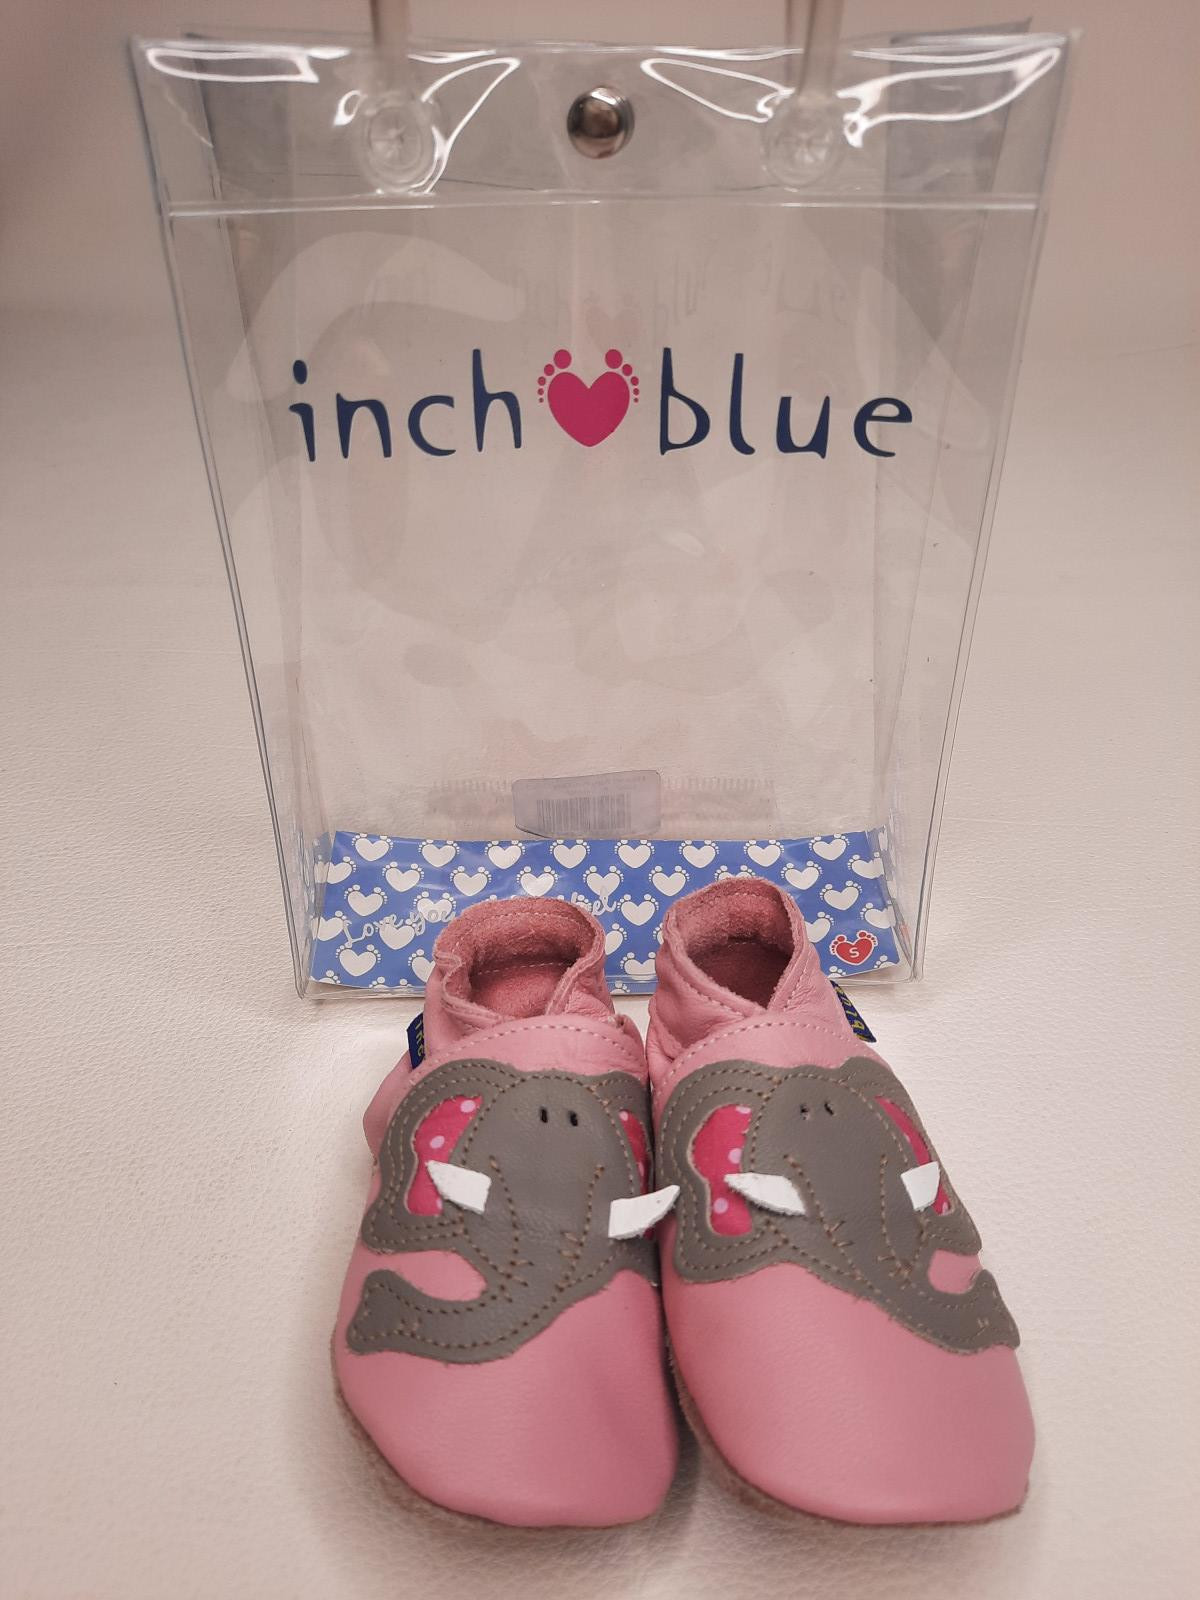 Chaussons en cuir 0-6 mois Elephant baby pink/grey - photo 6